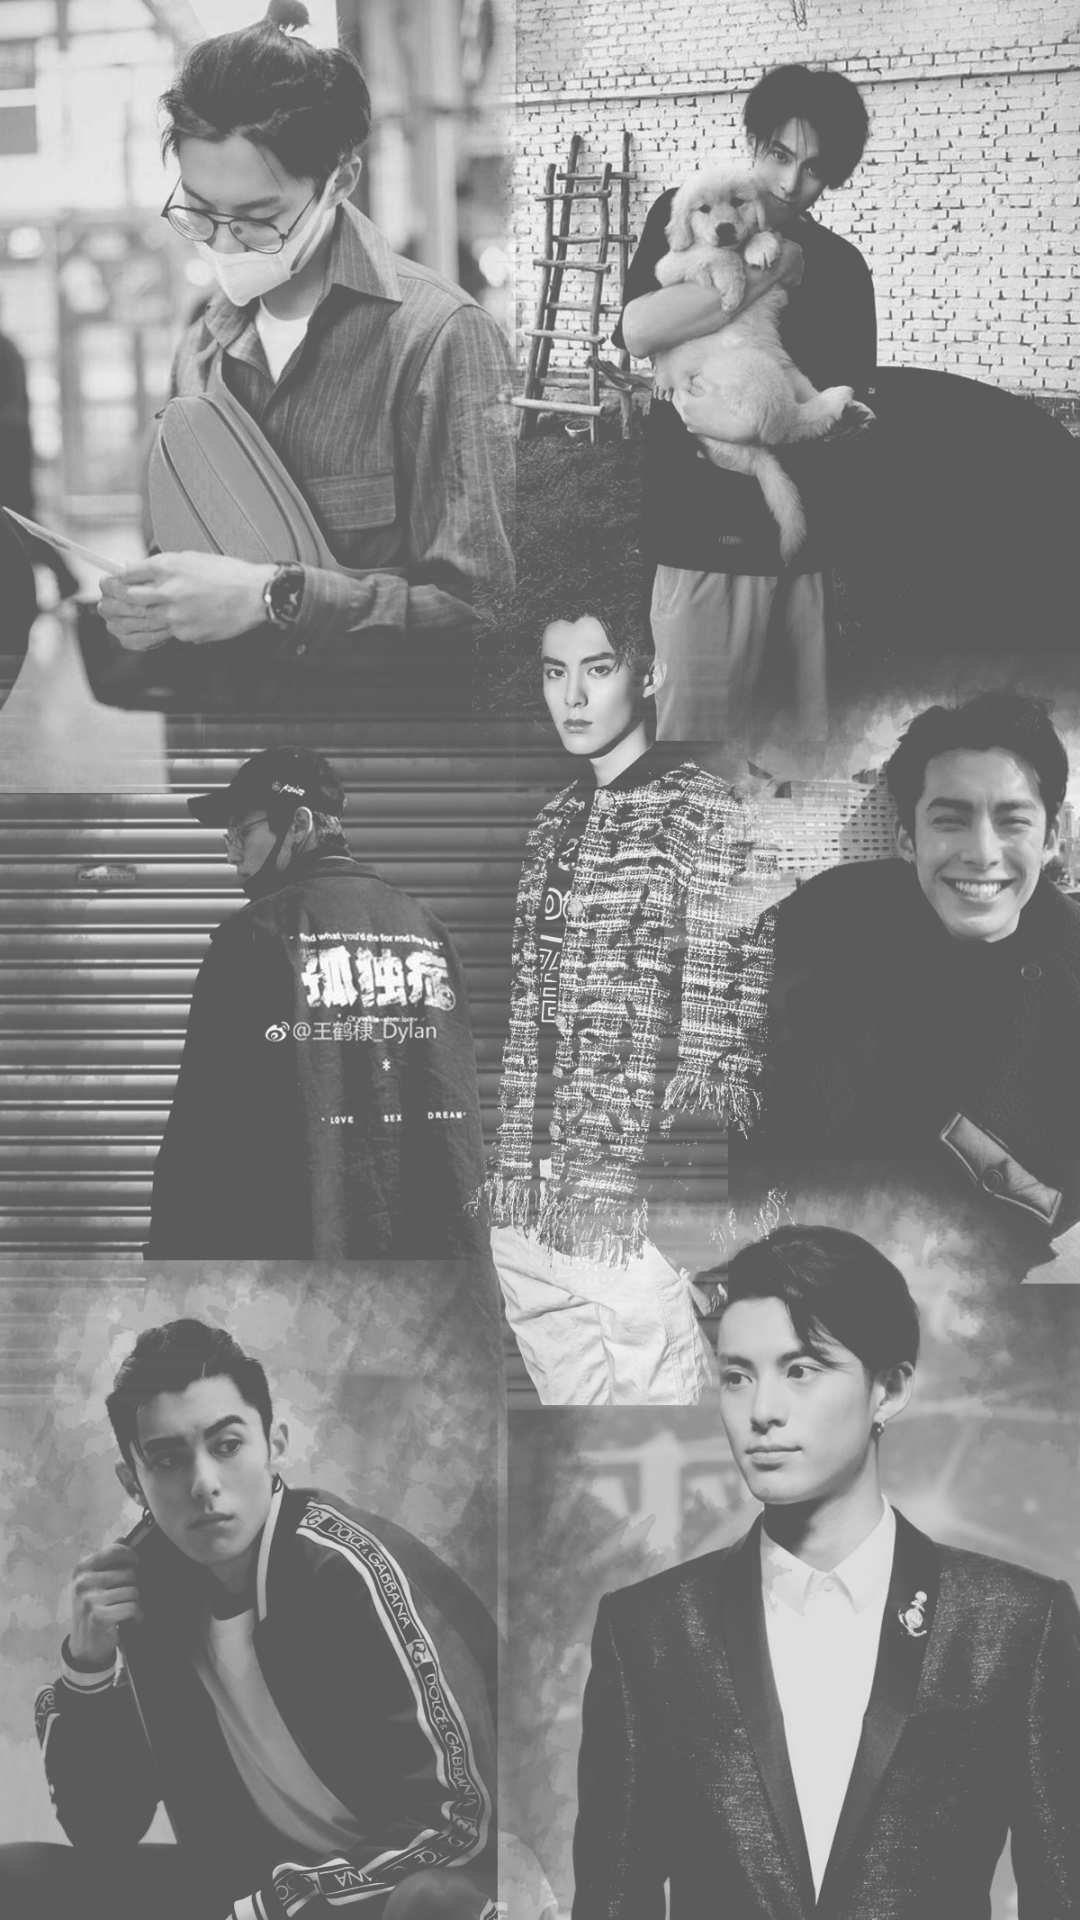 Just Miilk — Requested by Anonymous, Wang He Di / Dylan Wang